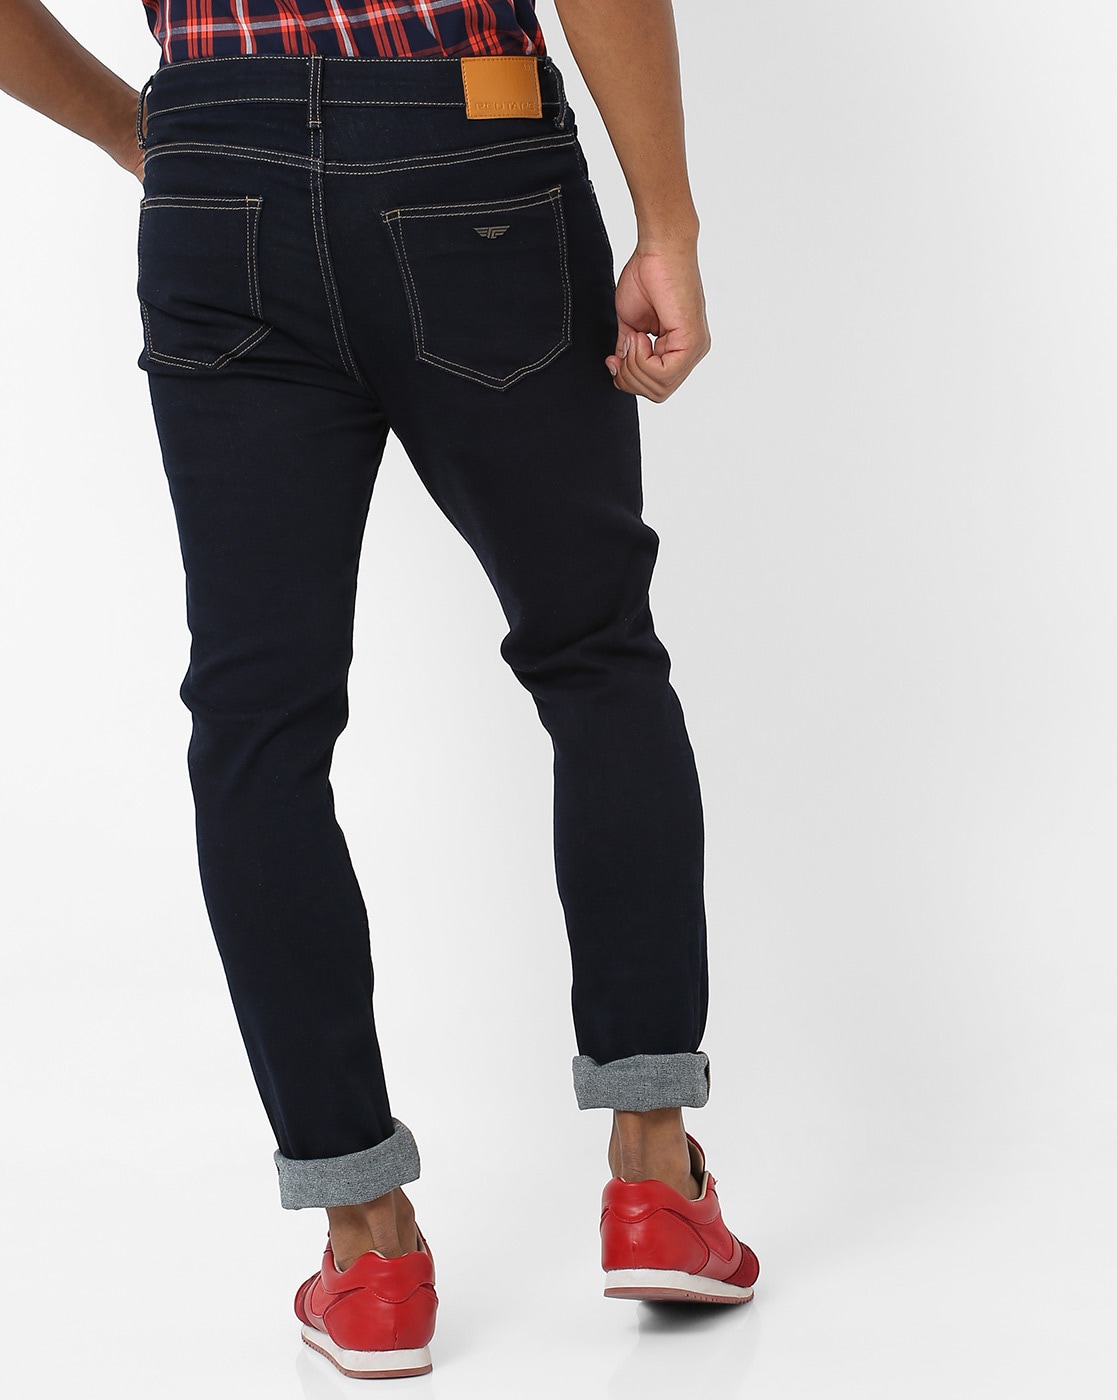 Represent Black and Red Tape Jeans – Wear Garson